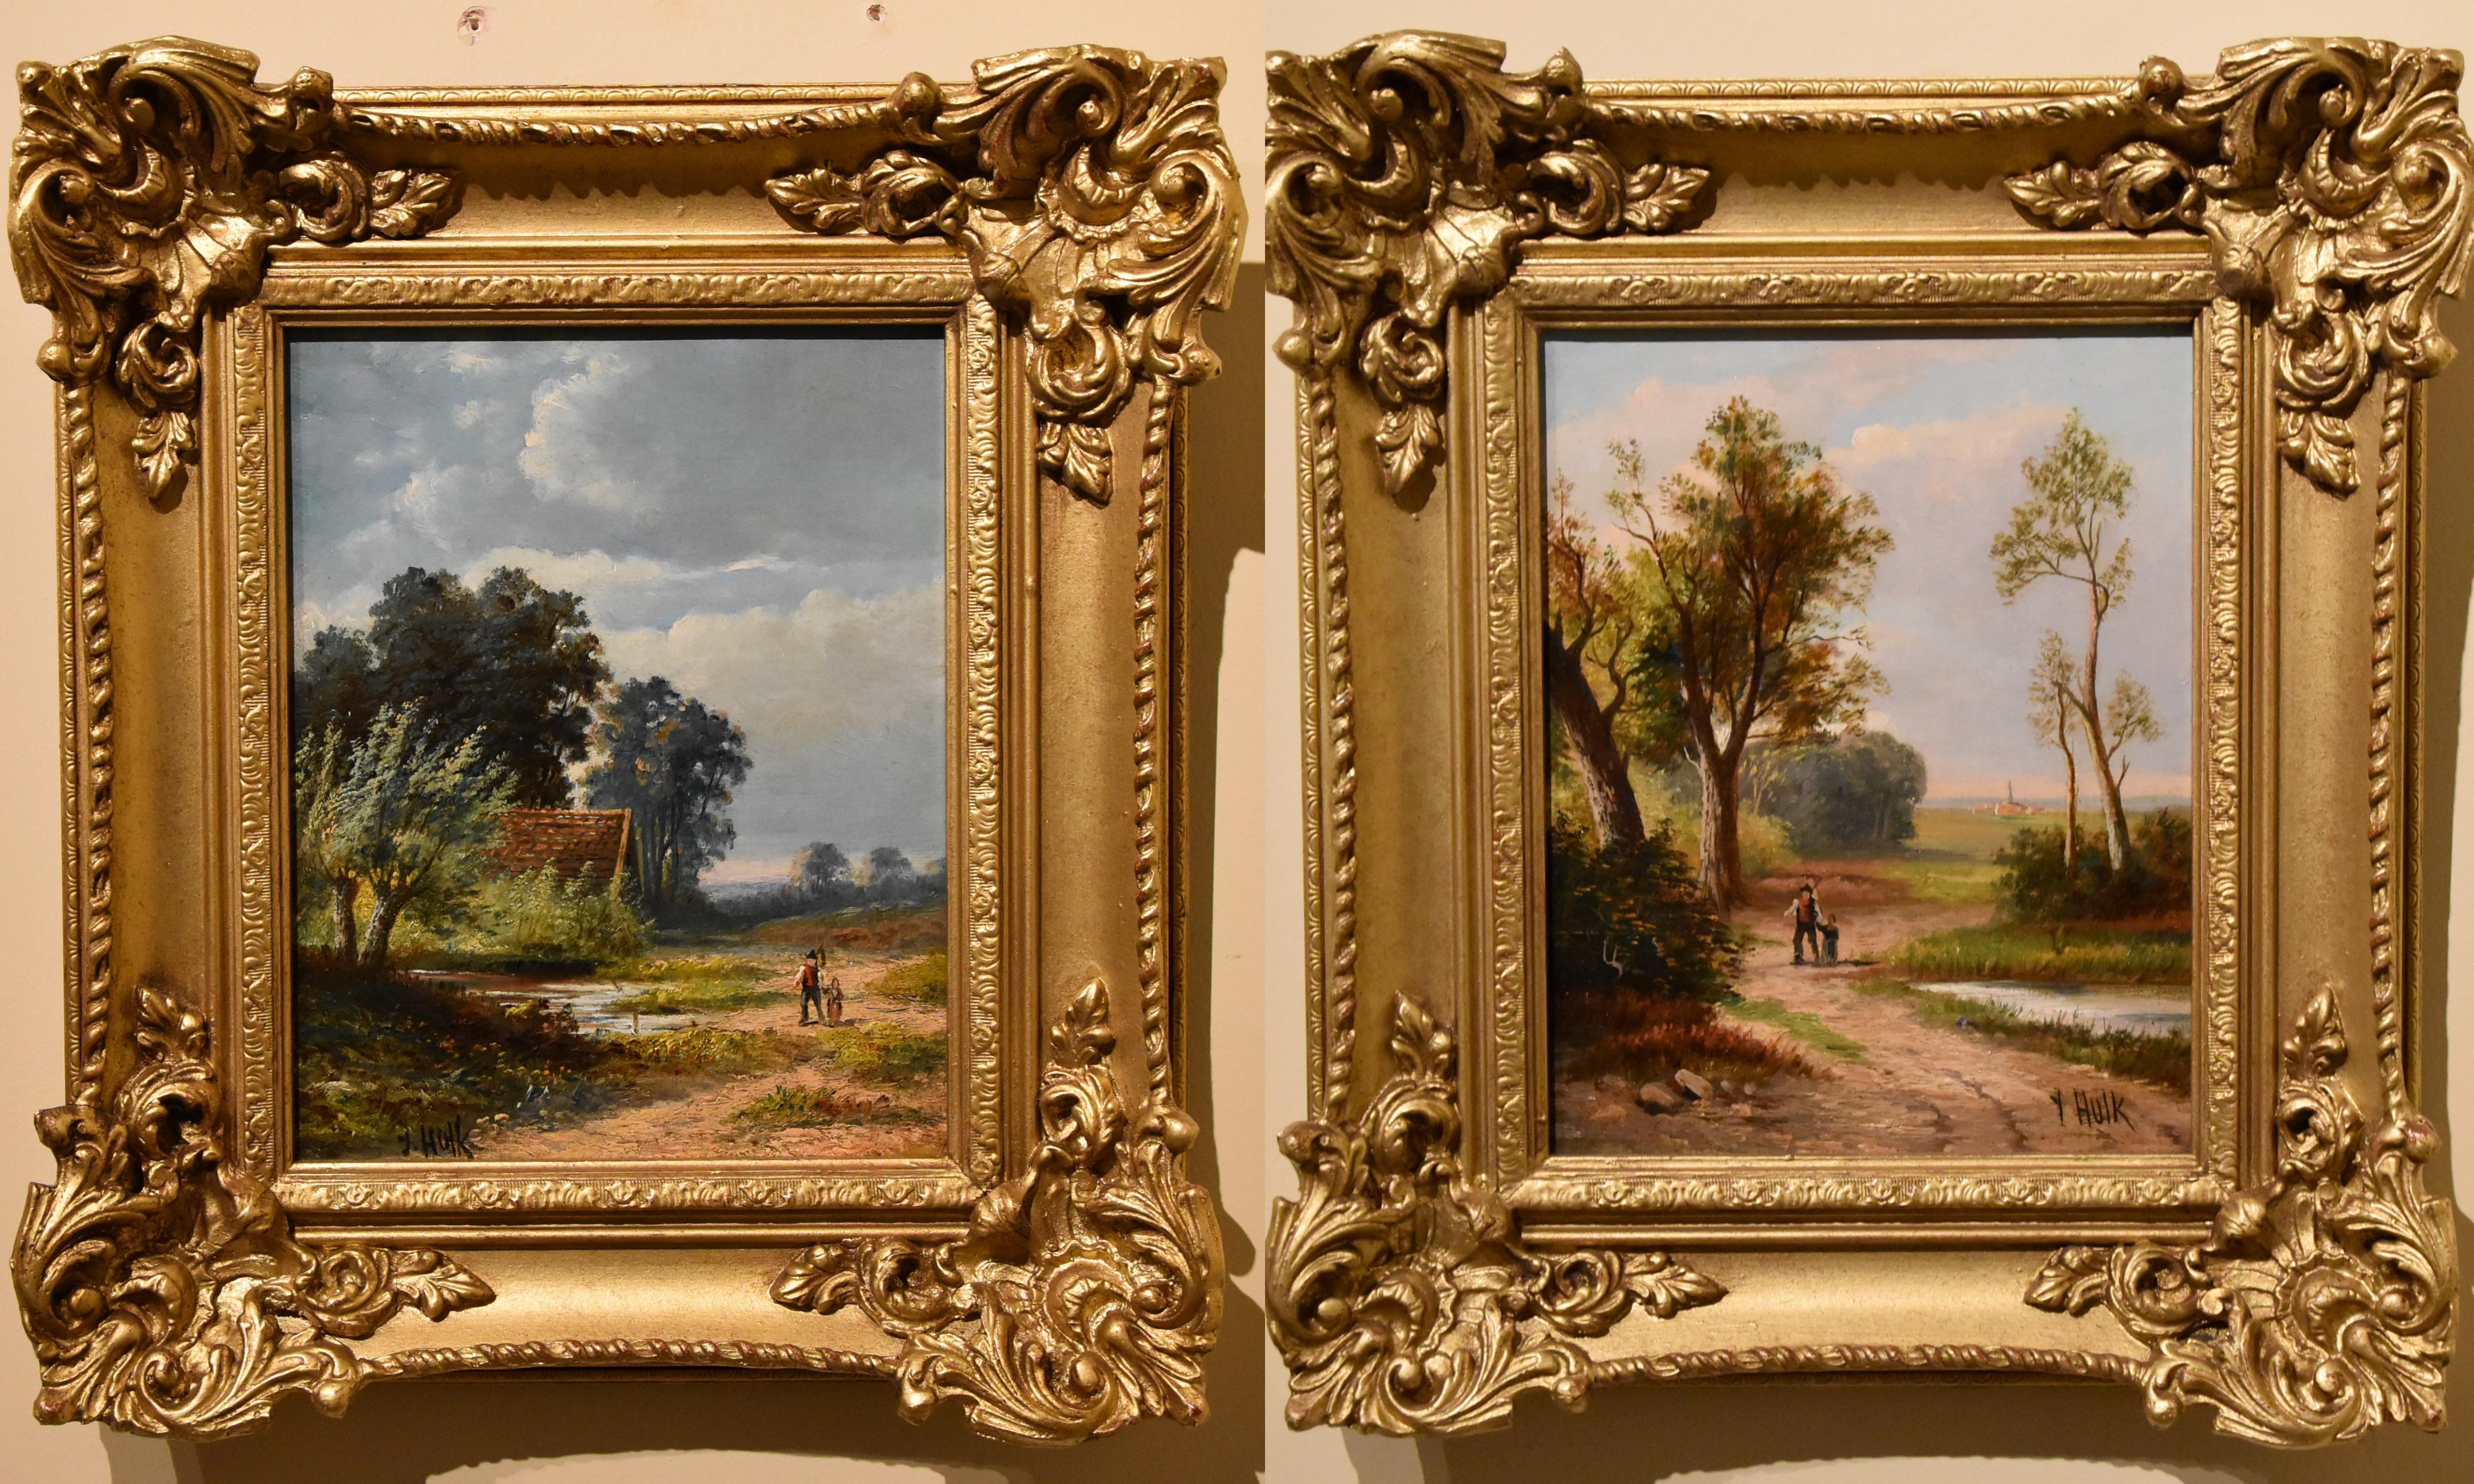 Oil Painting Pair by John Frederick Hulk Junior "Dutch Landscapes" RBA 1855 - 1913. Dutch painter of town scenes who studied at the Rjksaedemie in Amsterdam and Julians in Paris. Both oil on canvas. Signed

Dimensions unframed 10 x 8